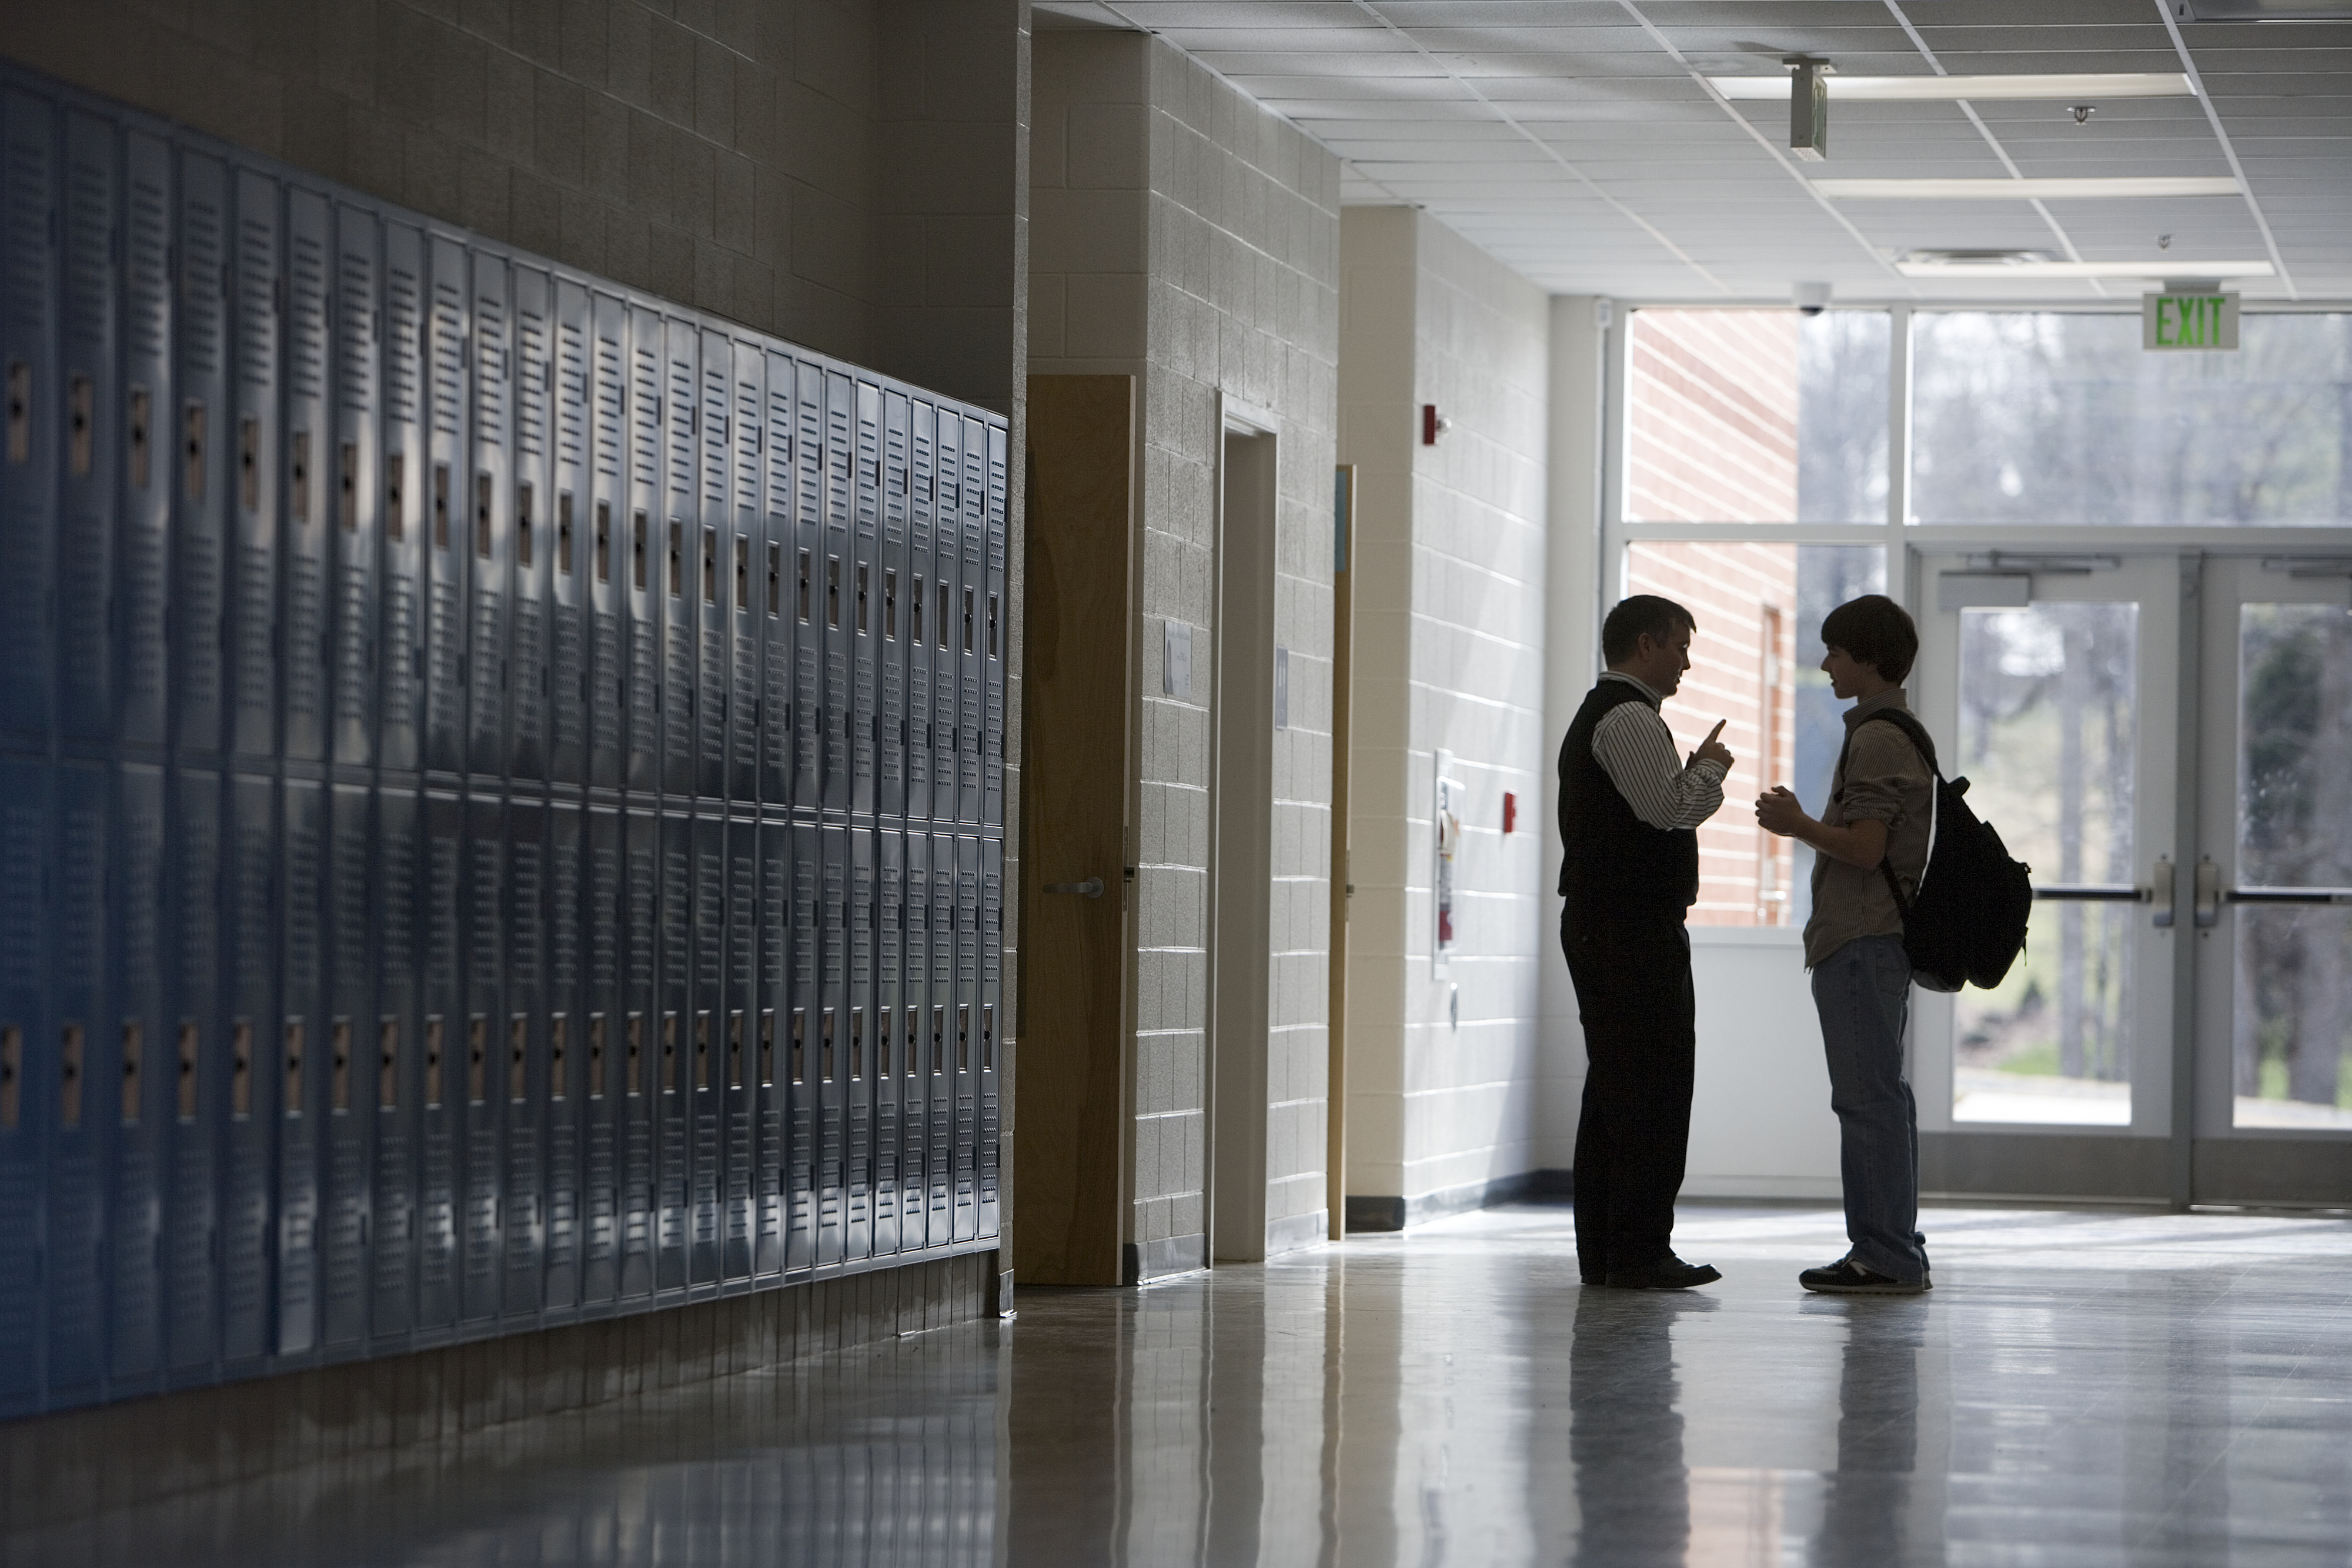 A teacher talks to a student in a quiet school hallway lined with lockers. The teacher gestures with their hand as they engage in conversation